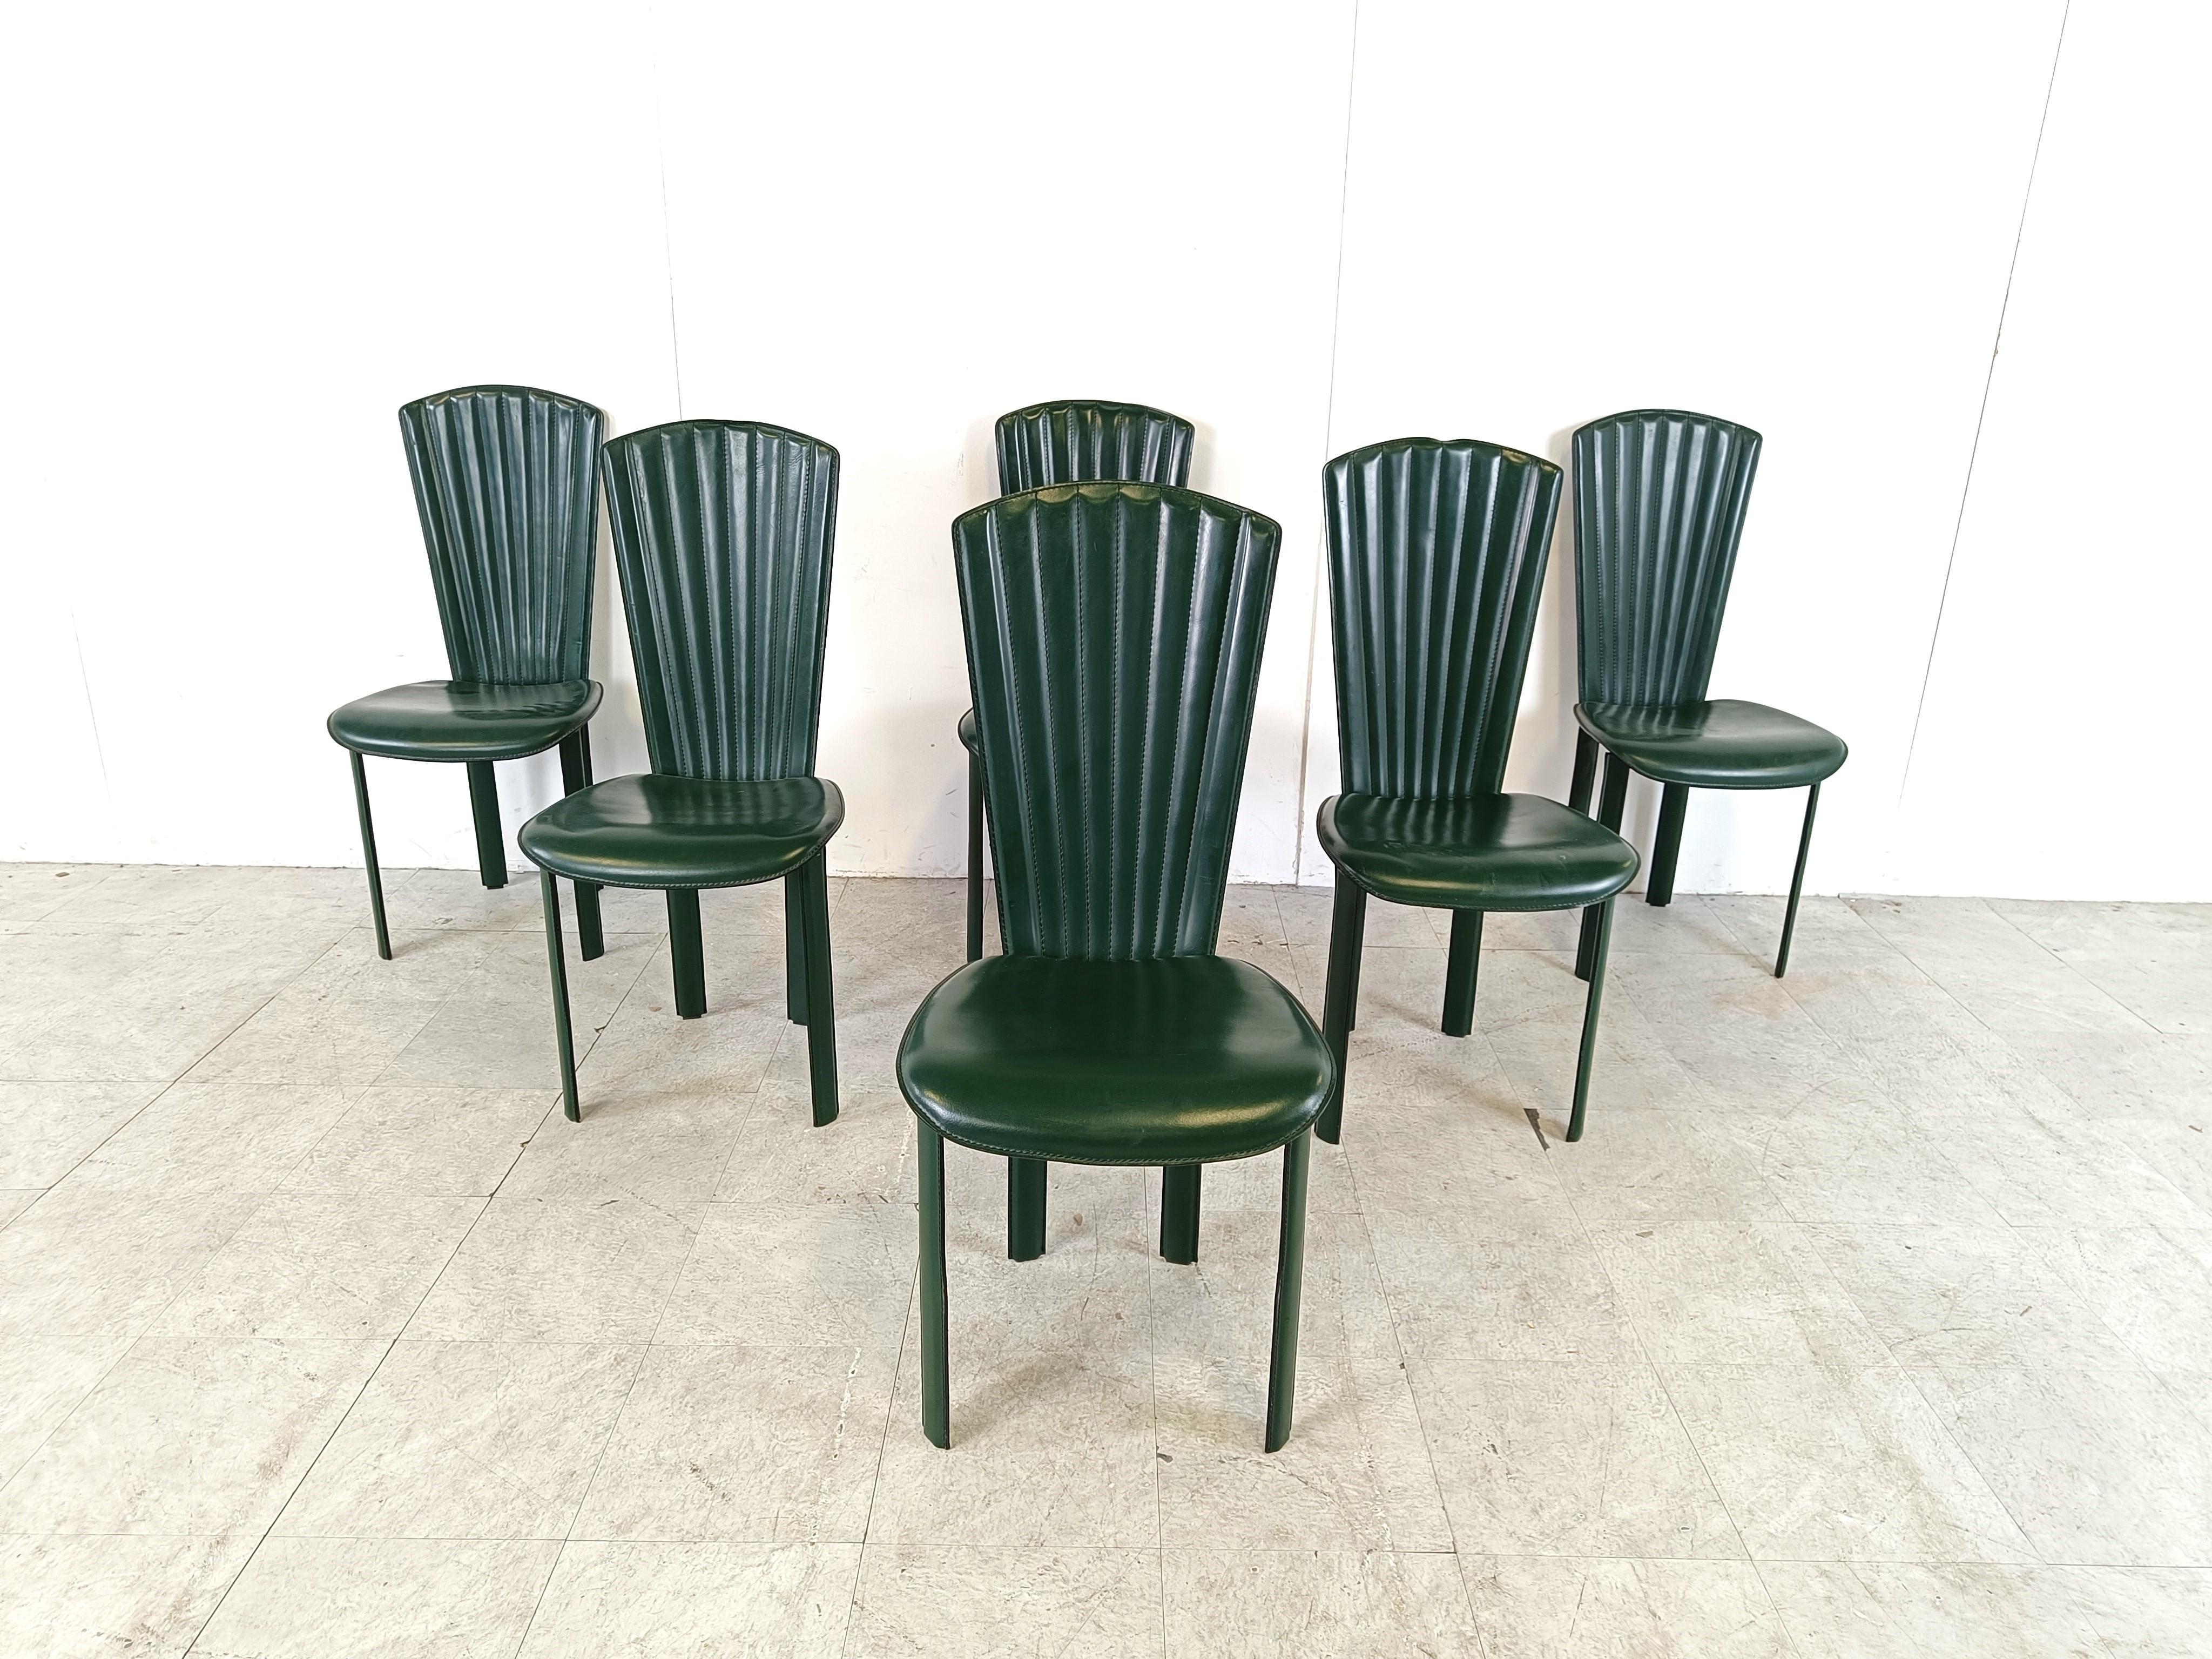 Set of 6 italian dining chairs with green reeded leather upholstery.

Beautiful design

1980s - Italy

Very good condition

Dimensions:
Height: 100cm/39.37